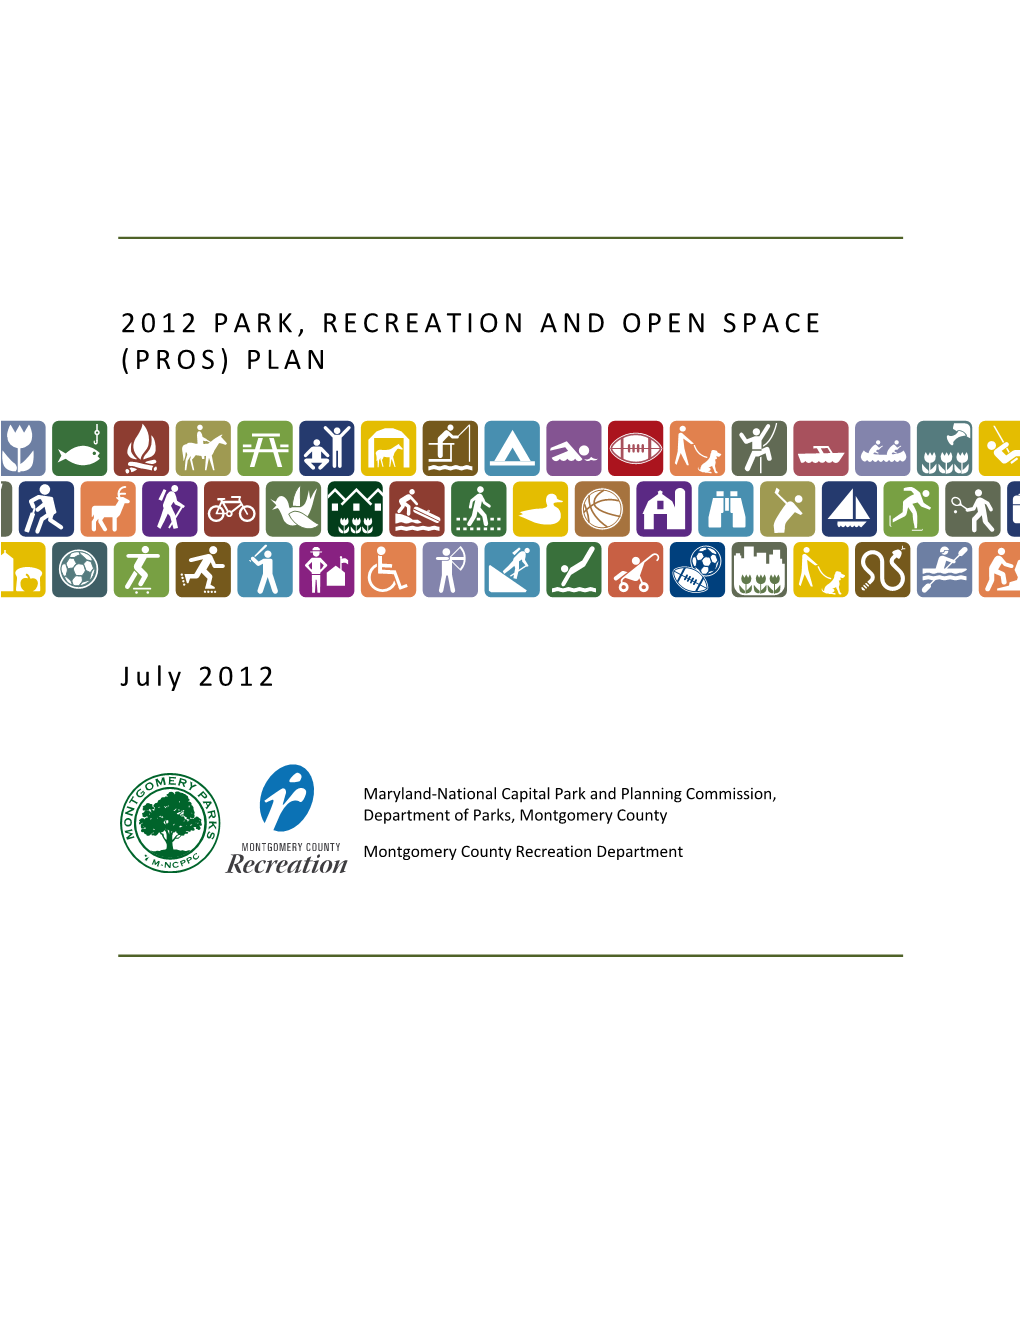 2012 Park Recreation and Open Space (PROS) Plan